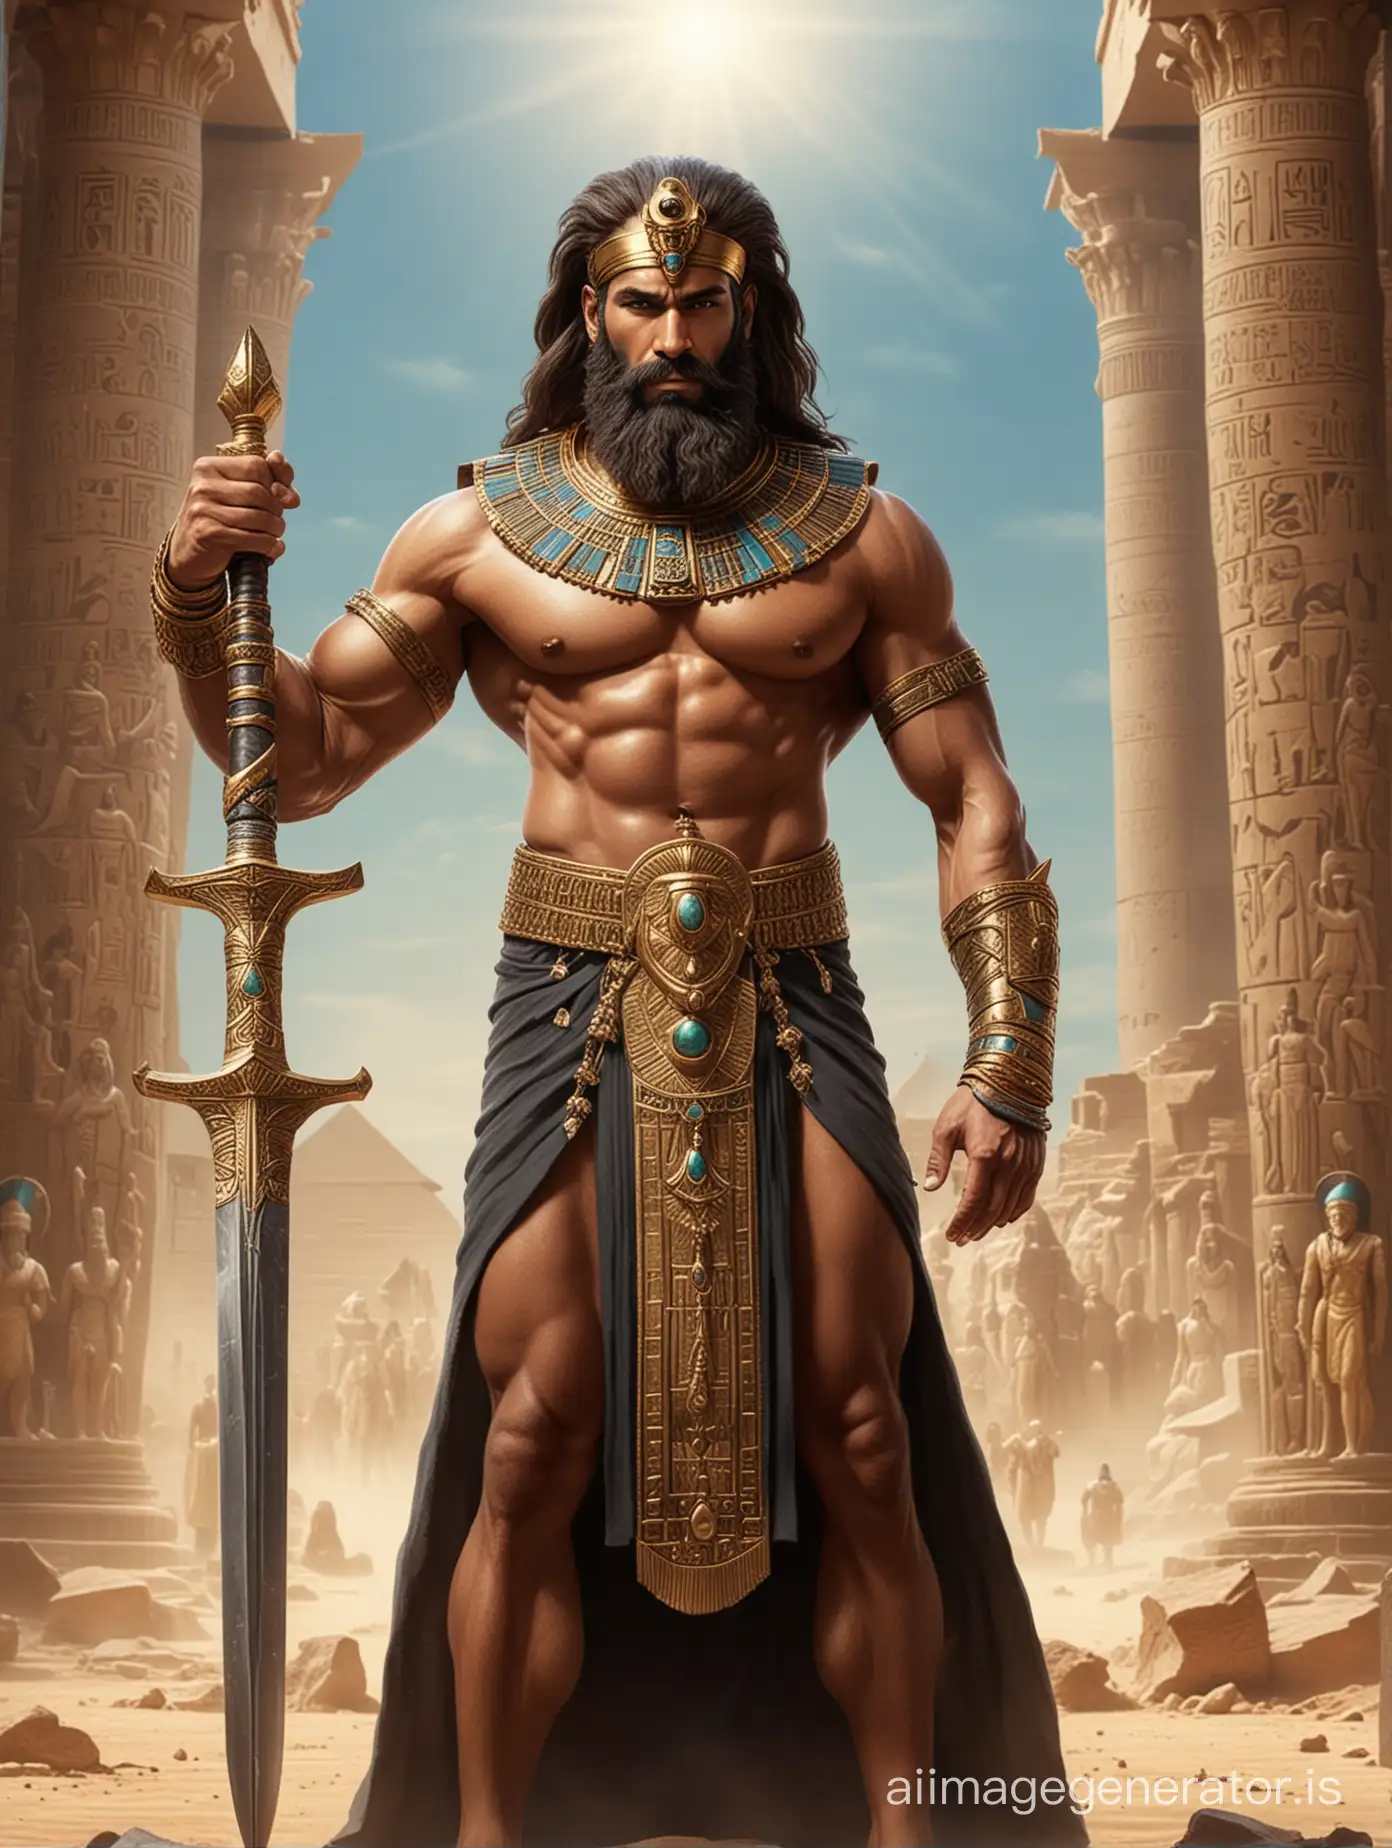 Ancient-Egyptian-Bodybuilder-King-with-Jeweled-Sword-in-Temple